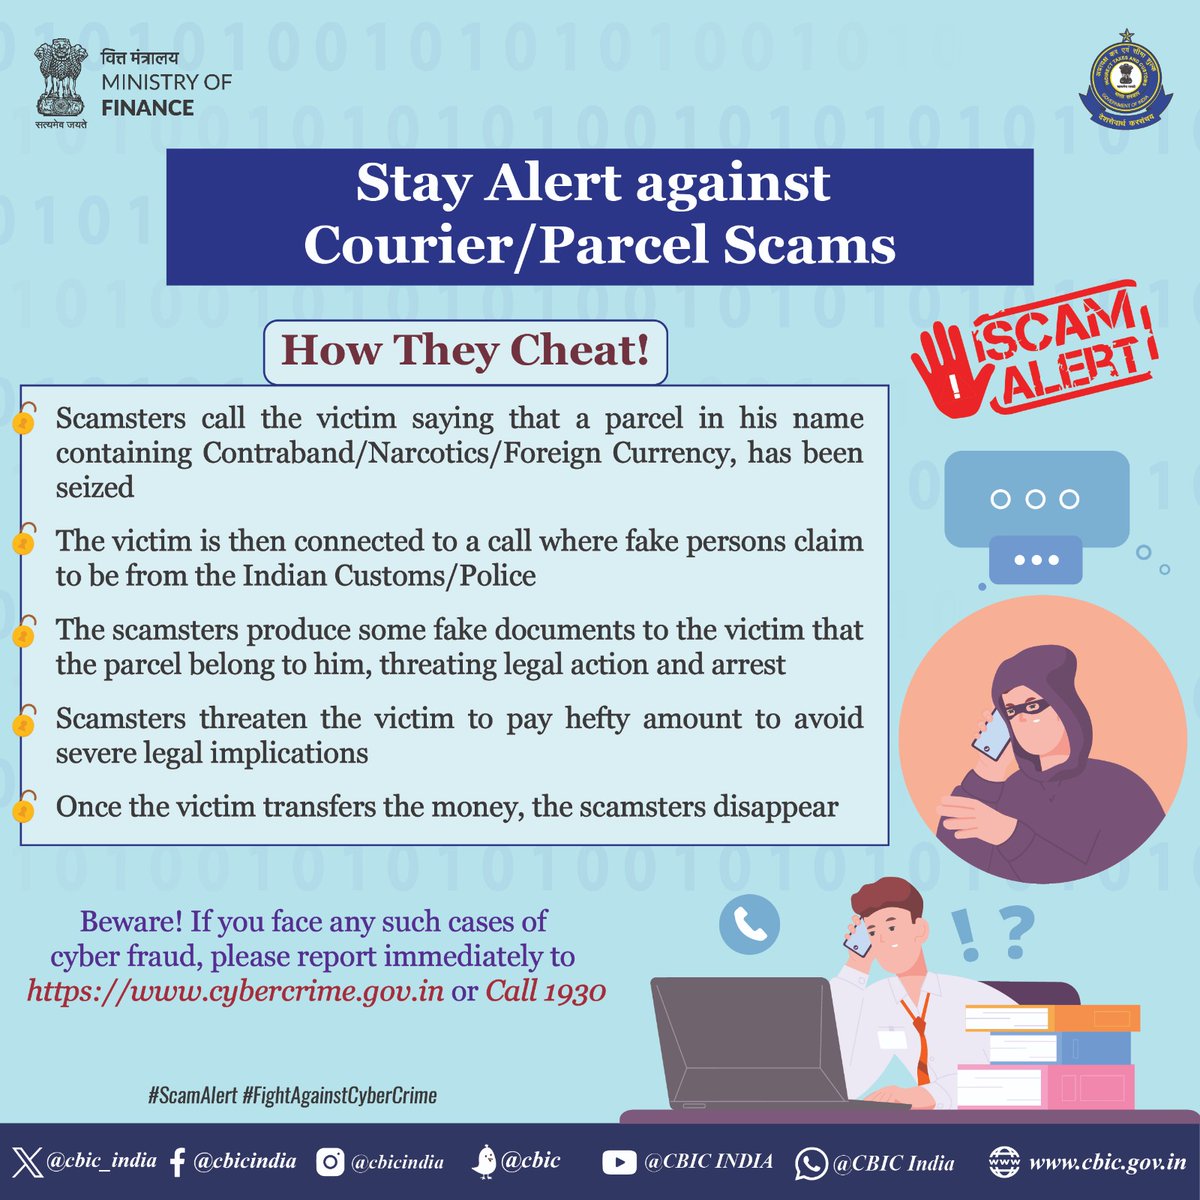 Stay alert against Courier/Parcel Scams!